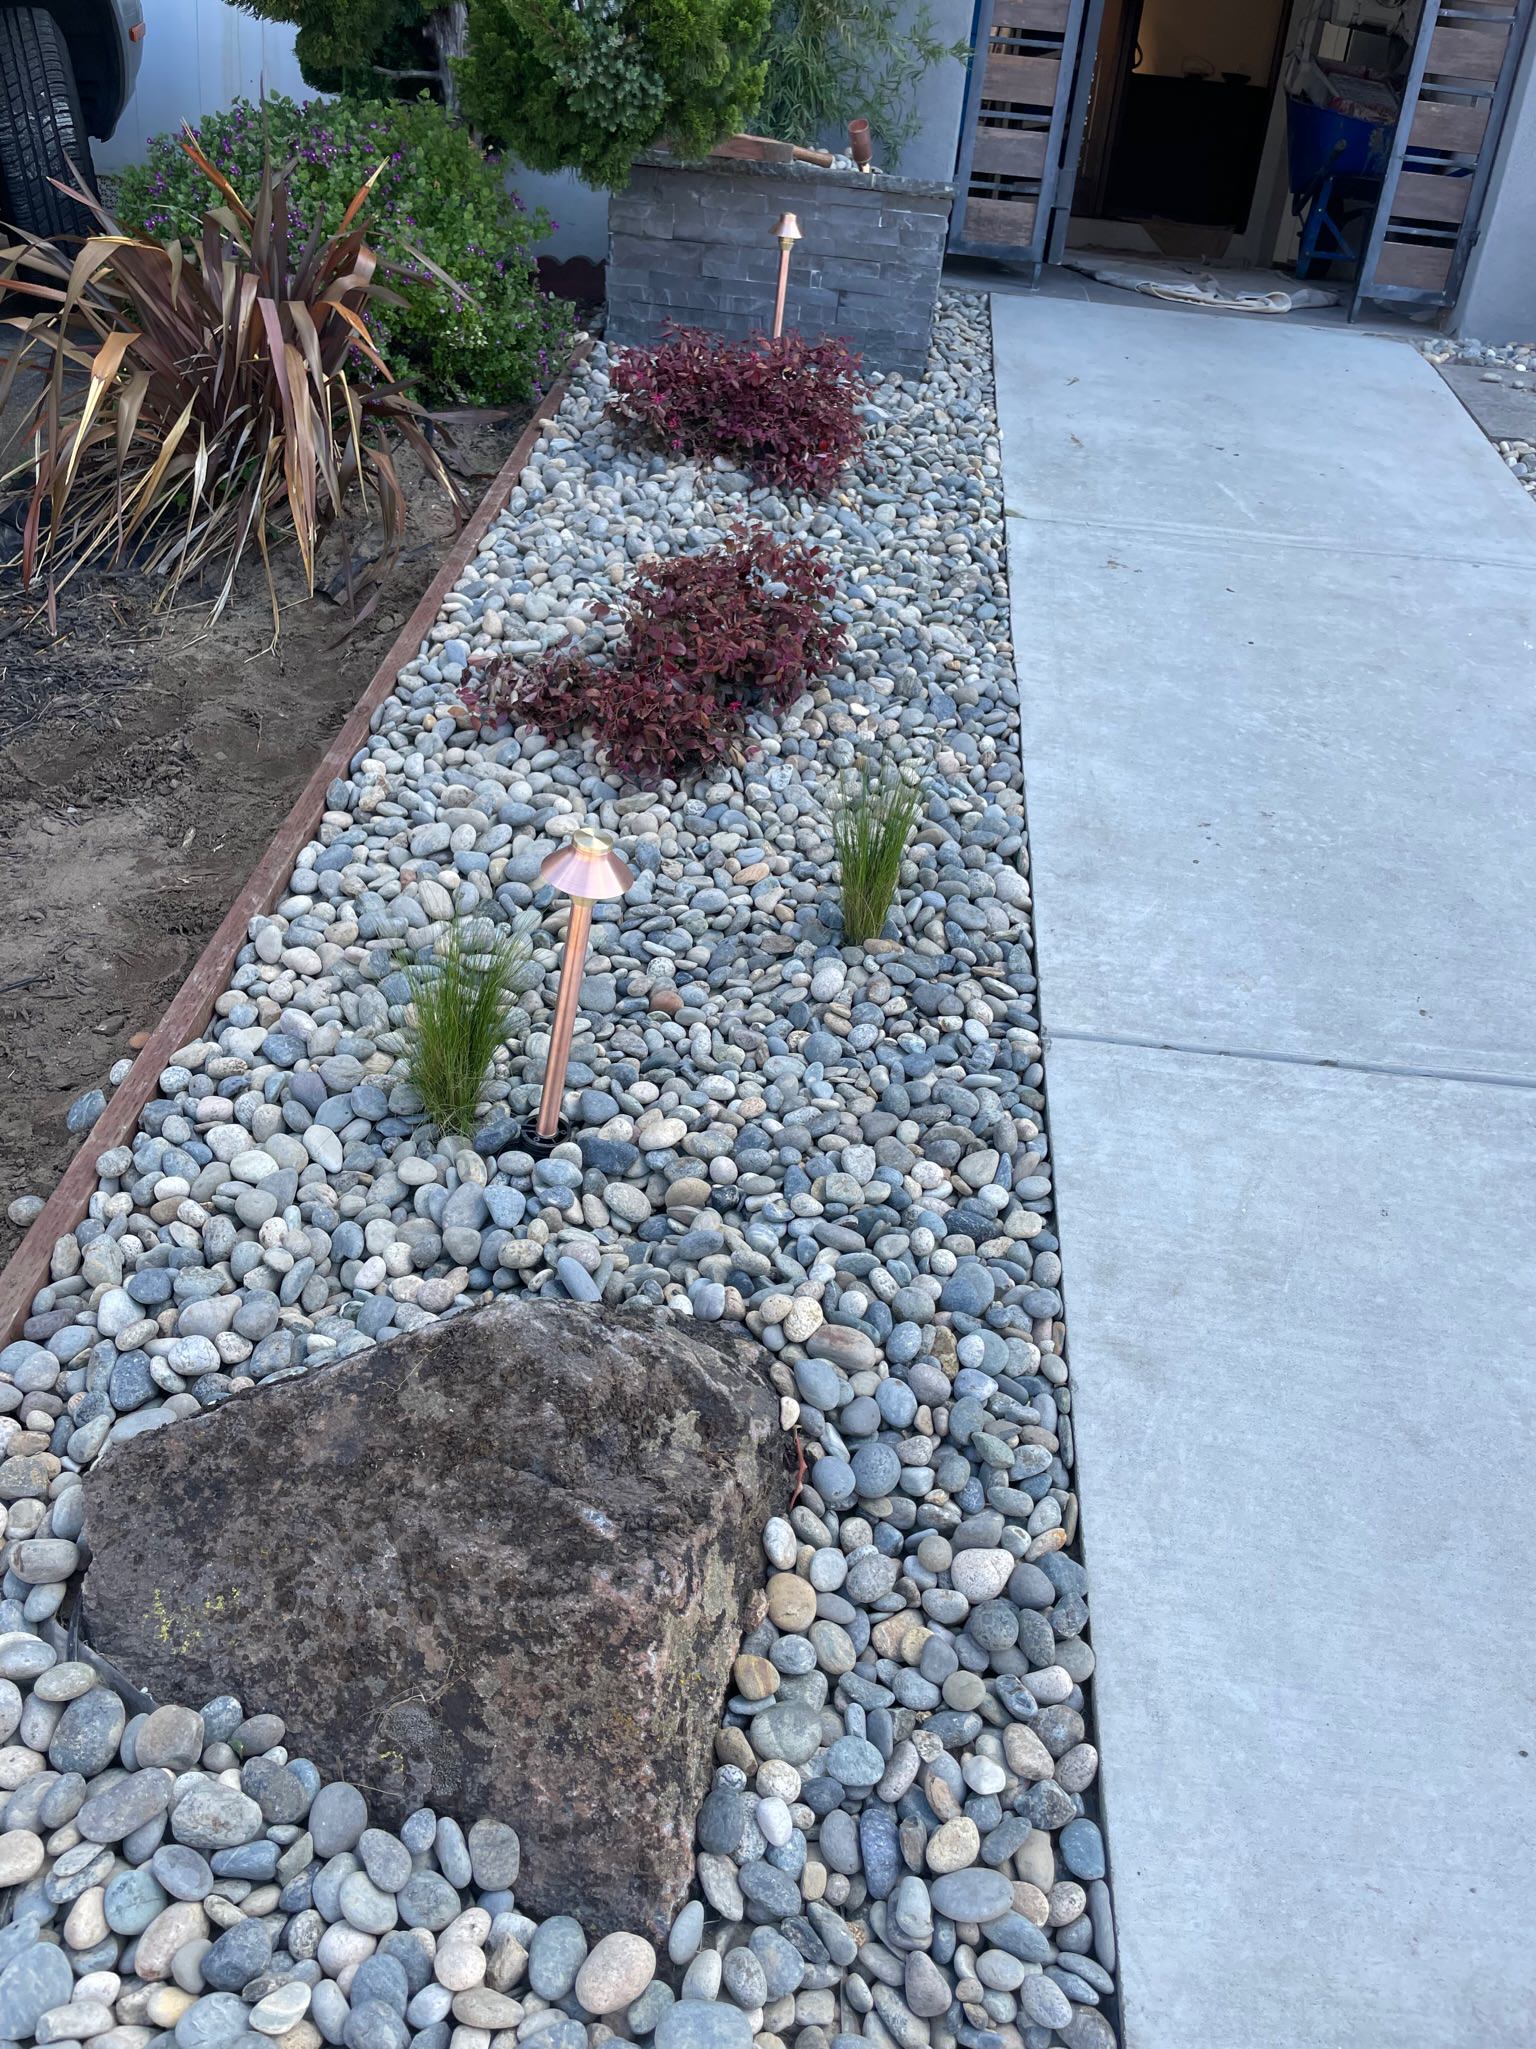 Completed front yard at Outer Sunset, San Francisco project. Boulder in front and raised planter in back. Two Chinese fringe plants planted next to each other vertically. Two Mexican Feather grass plants in back of boulder and two copper light fixtures. Ground covered with Lynn Creek stones.